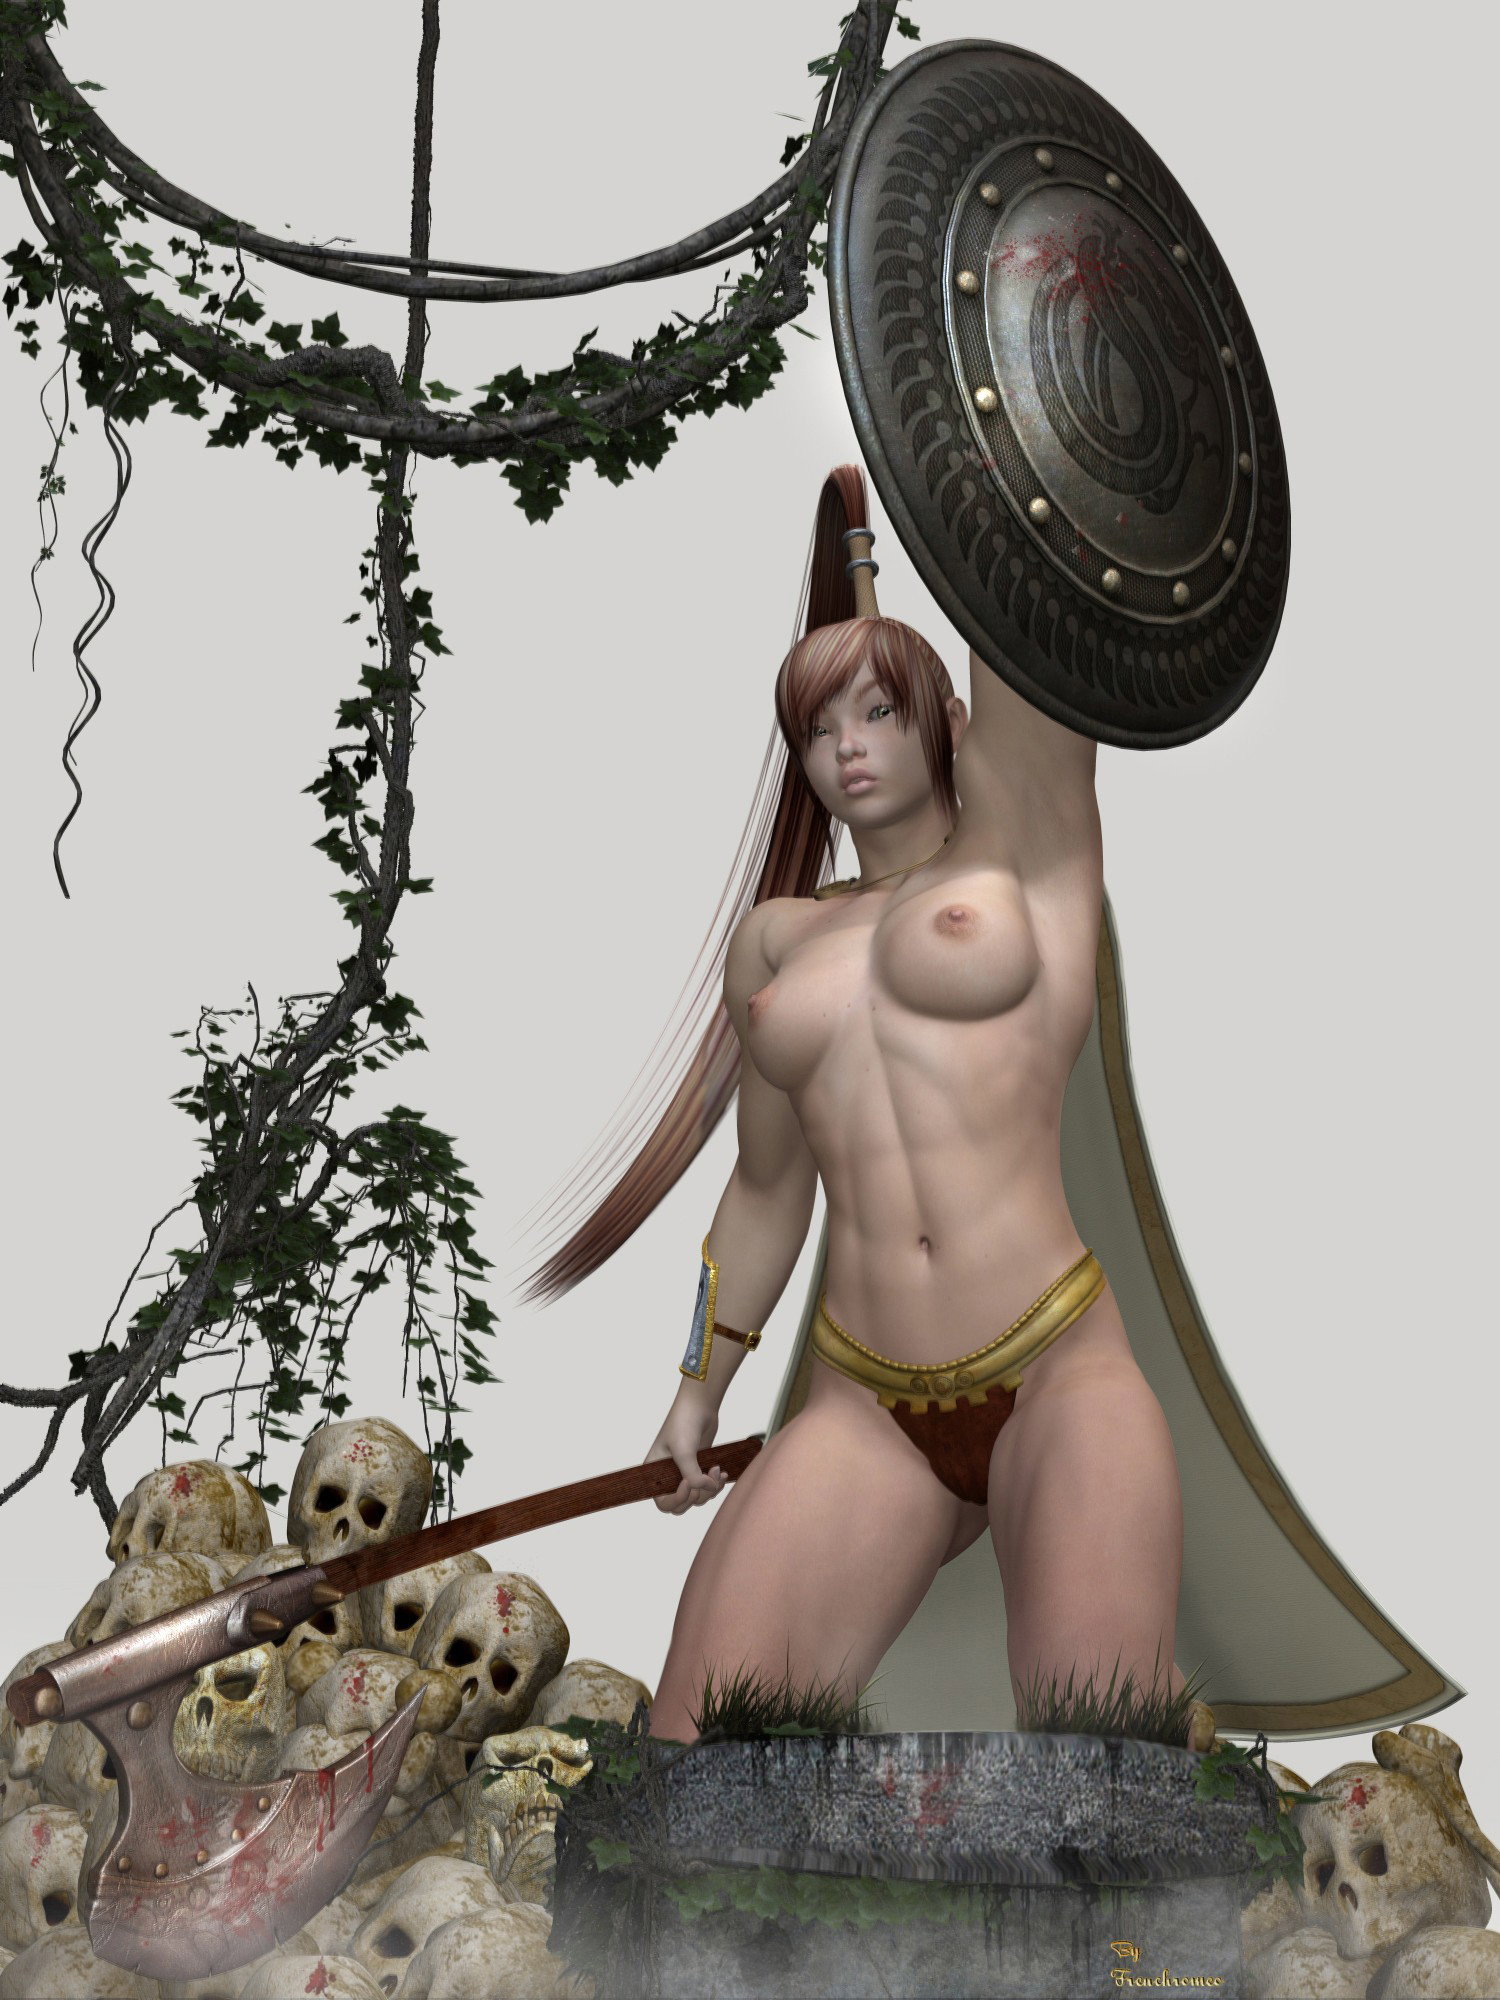 Photo by KonkeyDong80 with the username @KonkeyDong80,  July 29, 2017 at 1:43 AM and the text says '#girl  #woman  #fantasy  #art  #warrior  #boobs  #breasts  #tits  #hot  #sexy  #skulls  #blood  #battle  #shield  #axe'